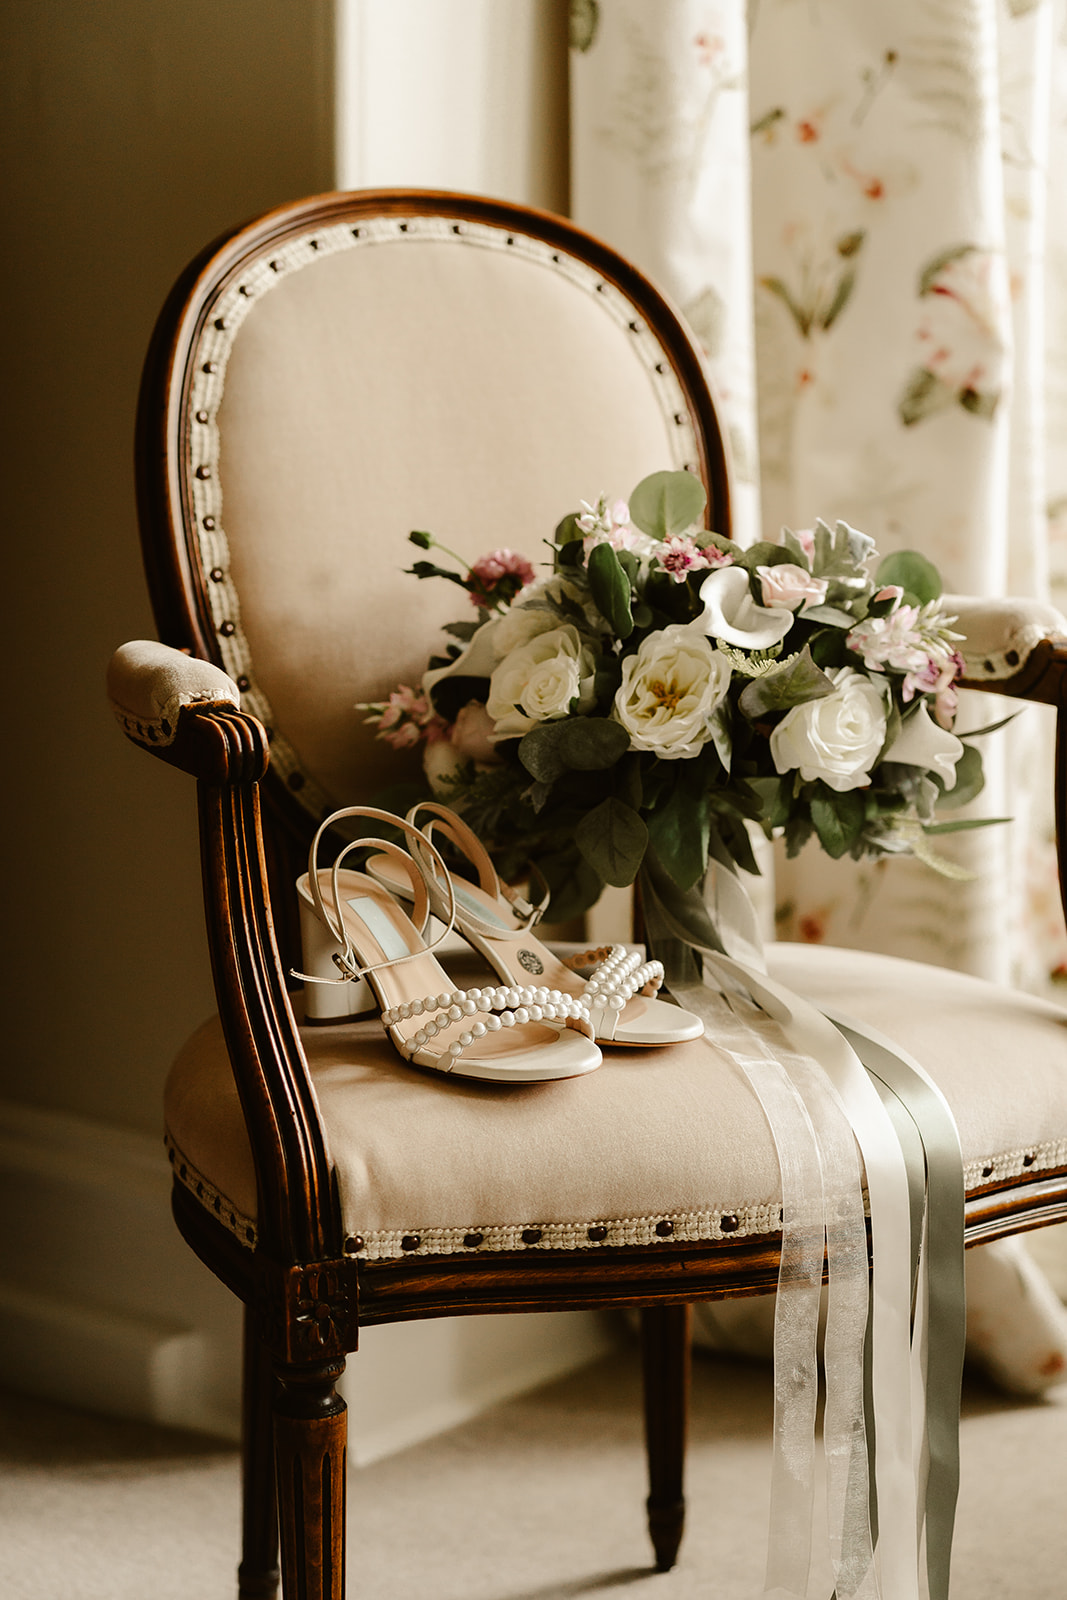 brides flowers and shoes sit on a chair